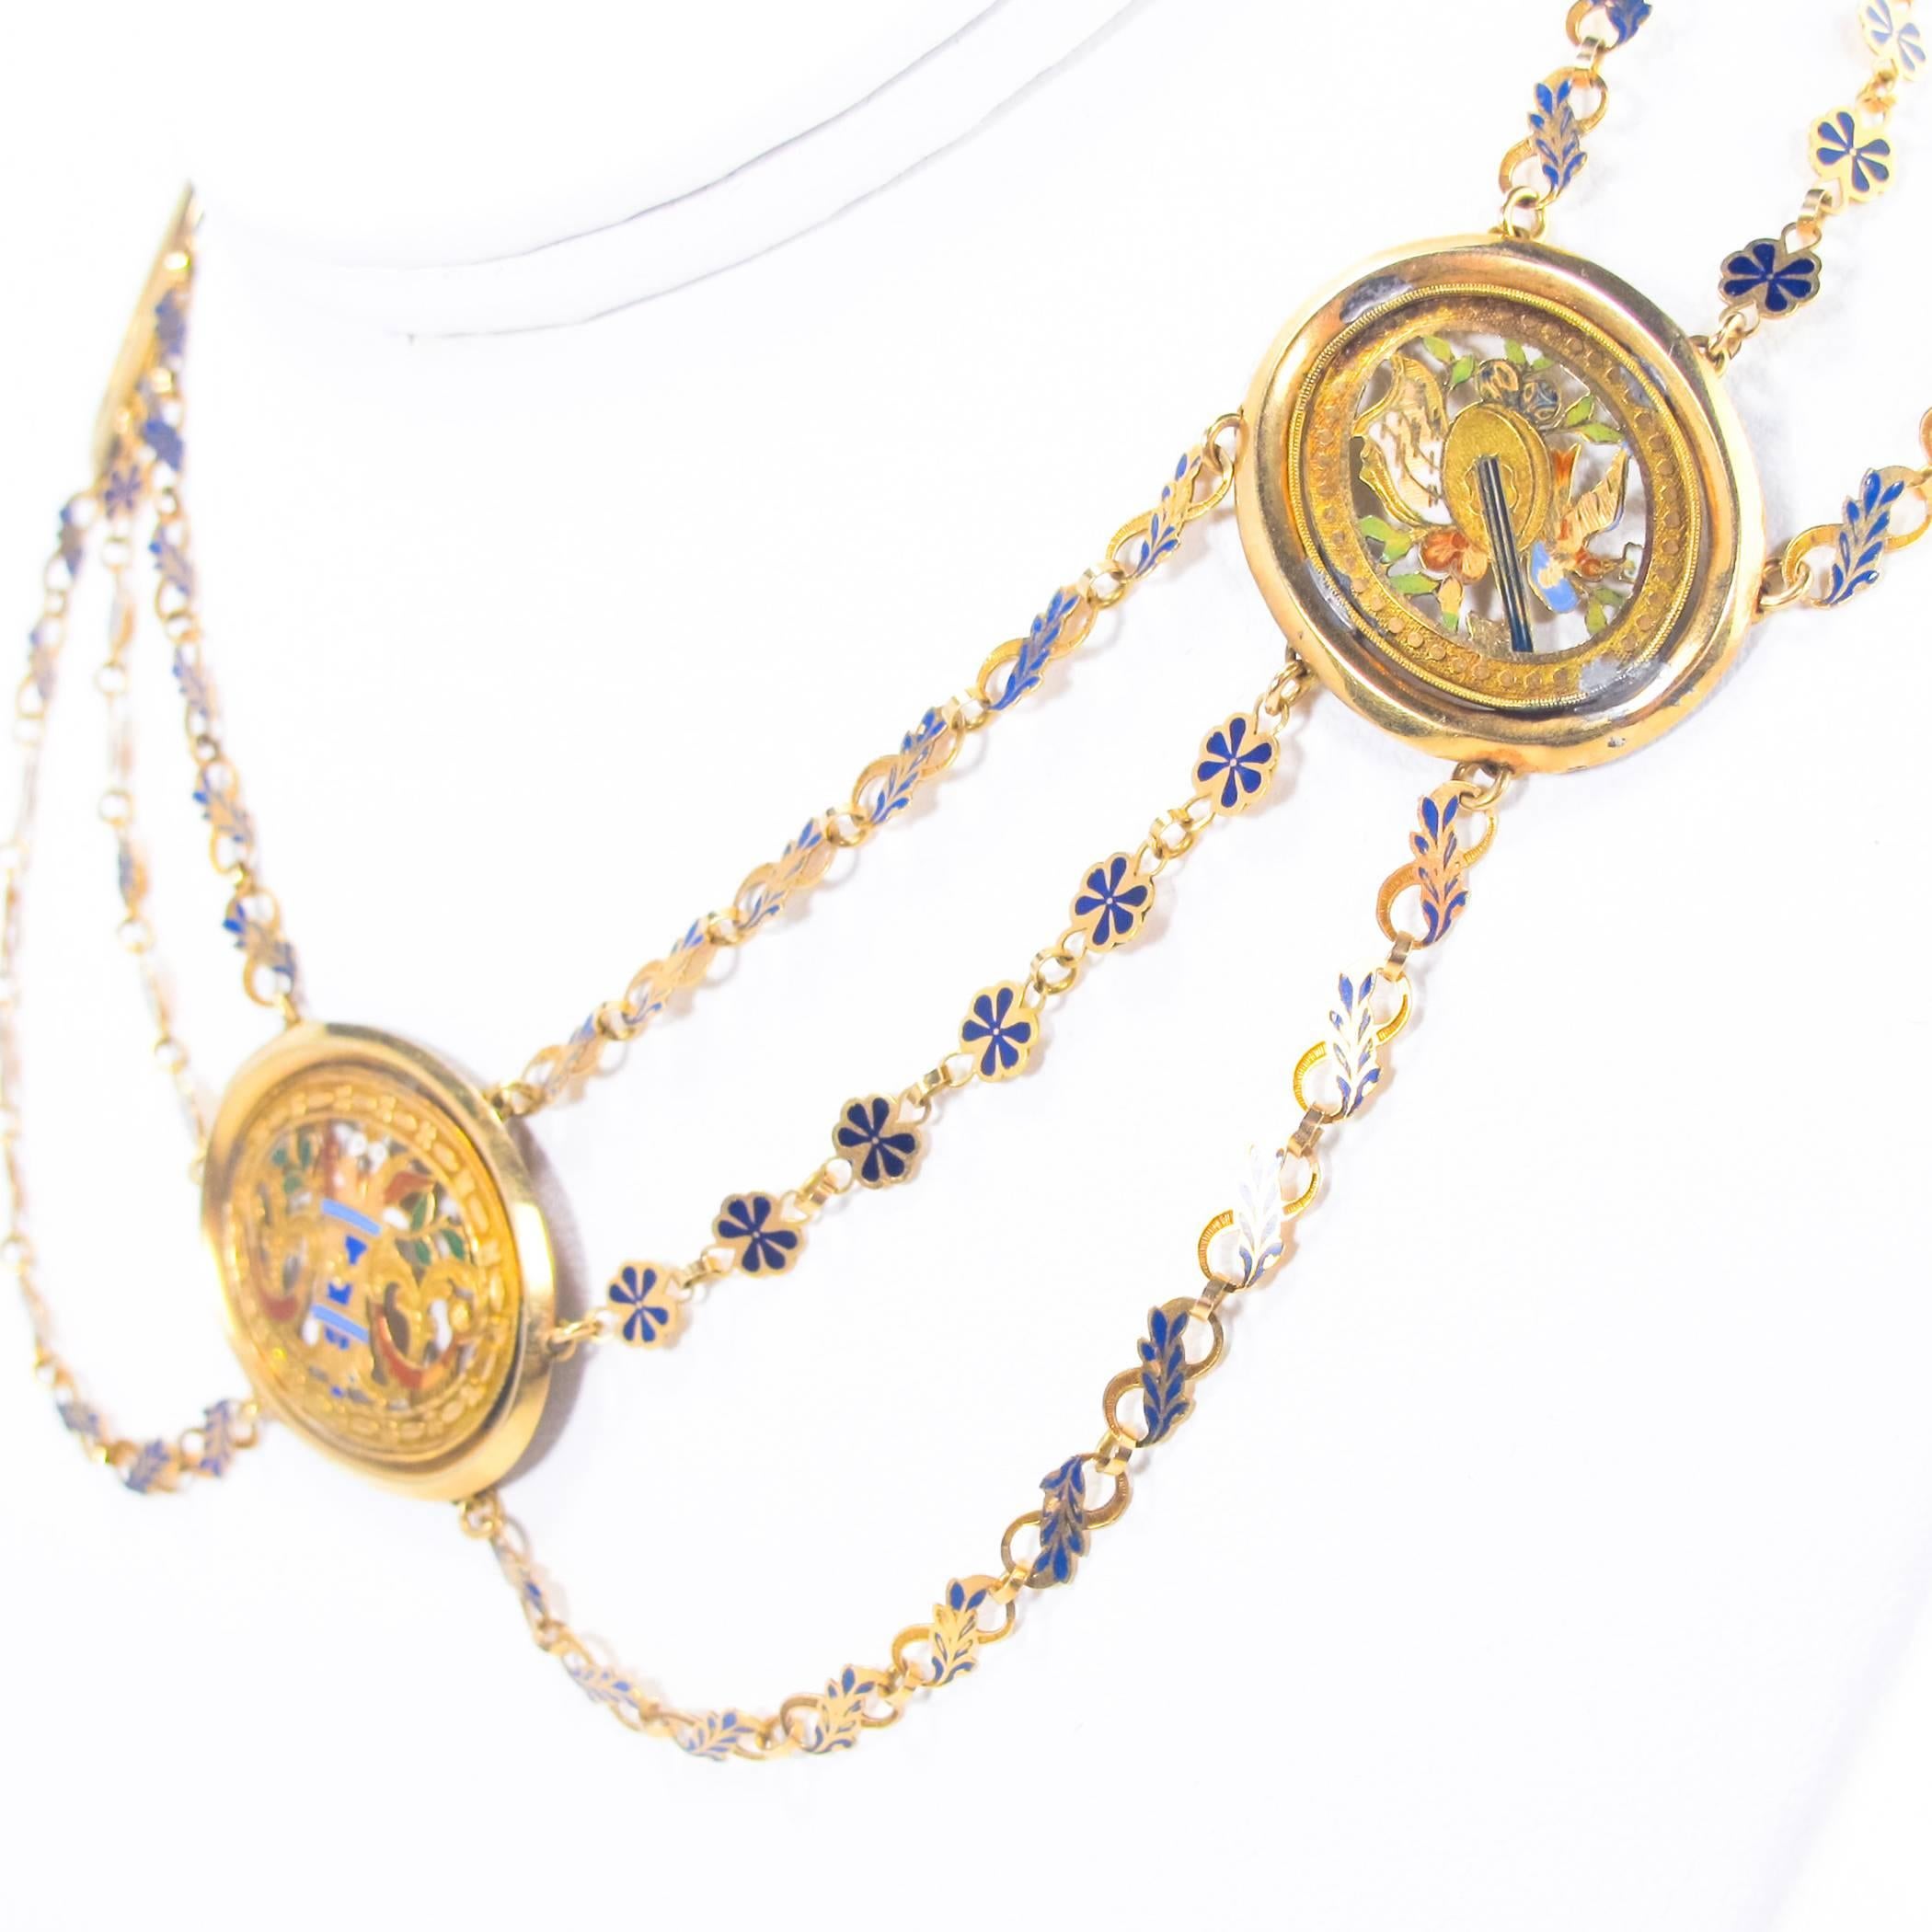 An extraordinary 18th Century hand crafted Collier d’Esclavage Necklace dating to about 1760. Three strands of cut out, etched and enamelled gold
links are caught by three enamelled plaques. Gentlemen gifted these costly
bespoke necklaces to their